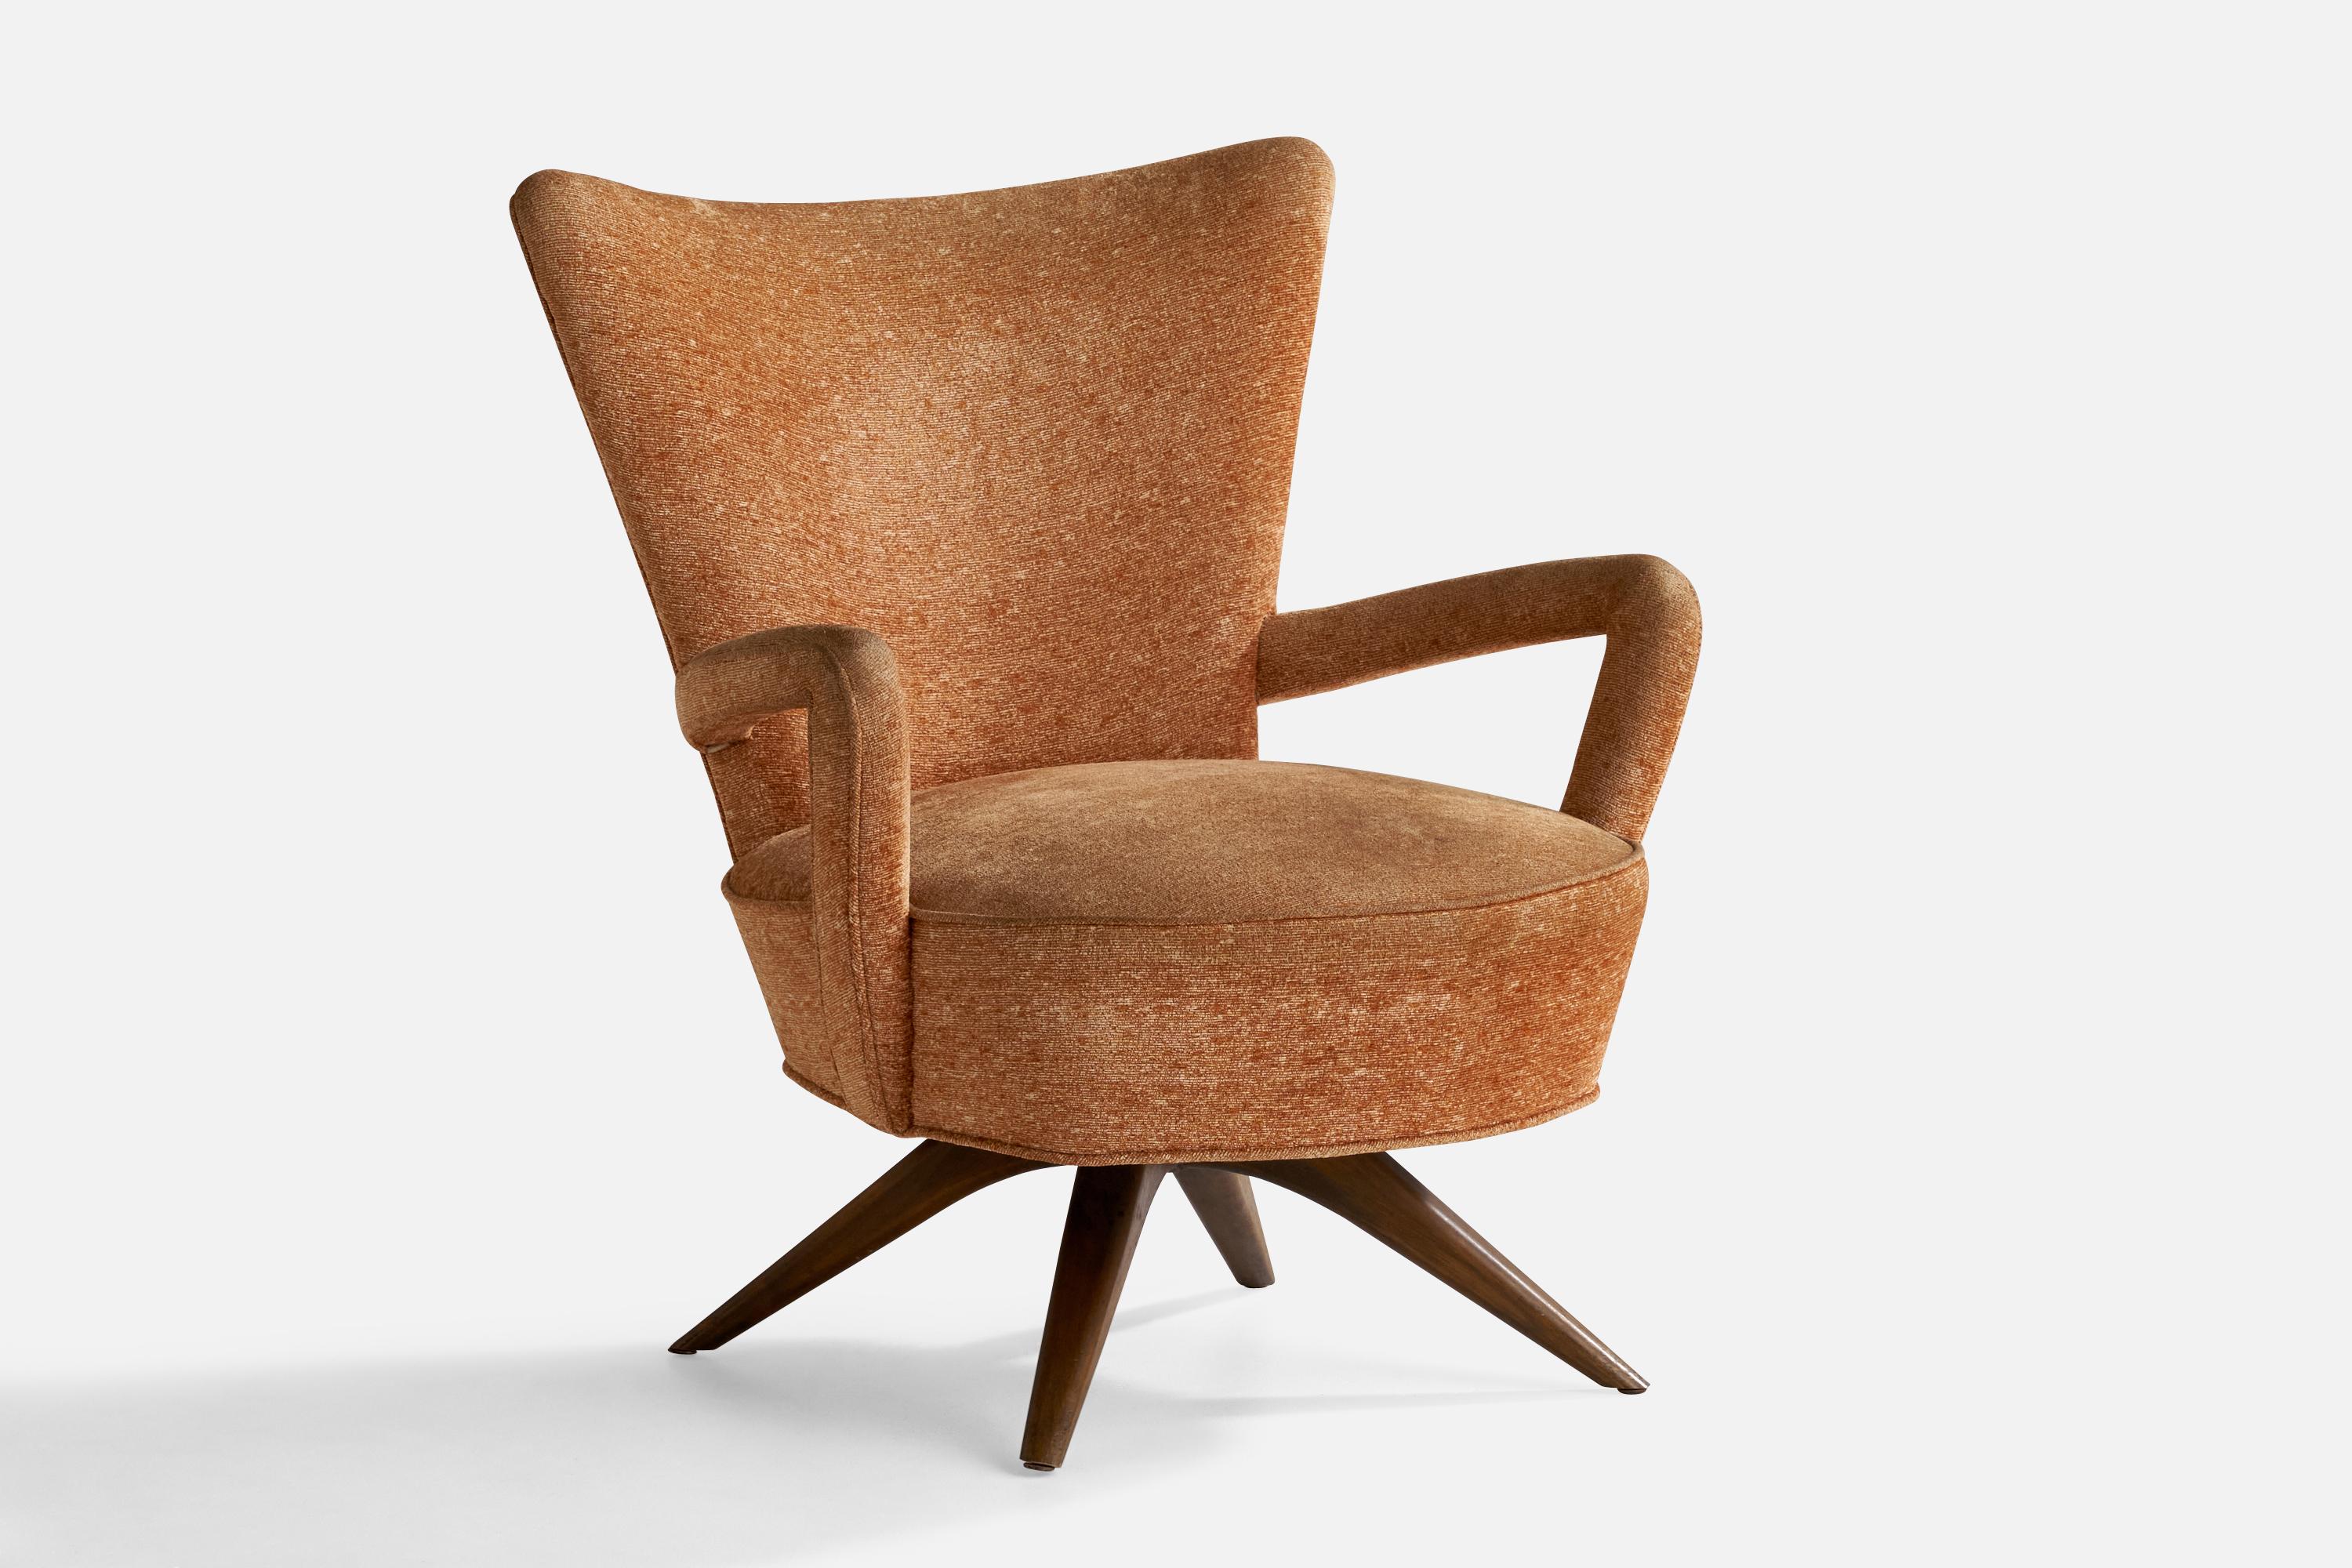 A walnut and beige fabric lounge chair designed and produced by Ernst Schwadron, USA, 1940s.

Seat height: 14.75”